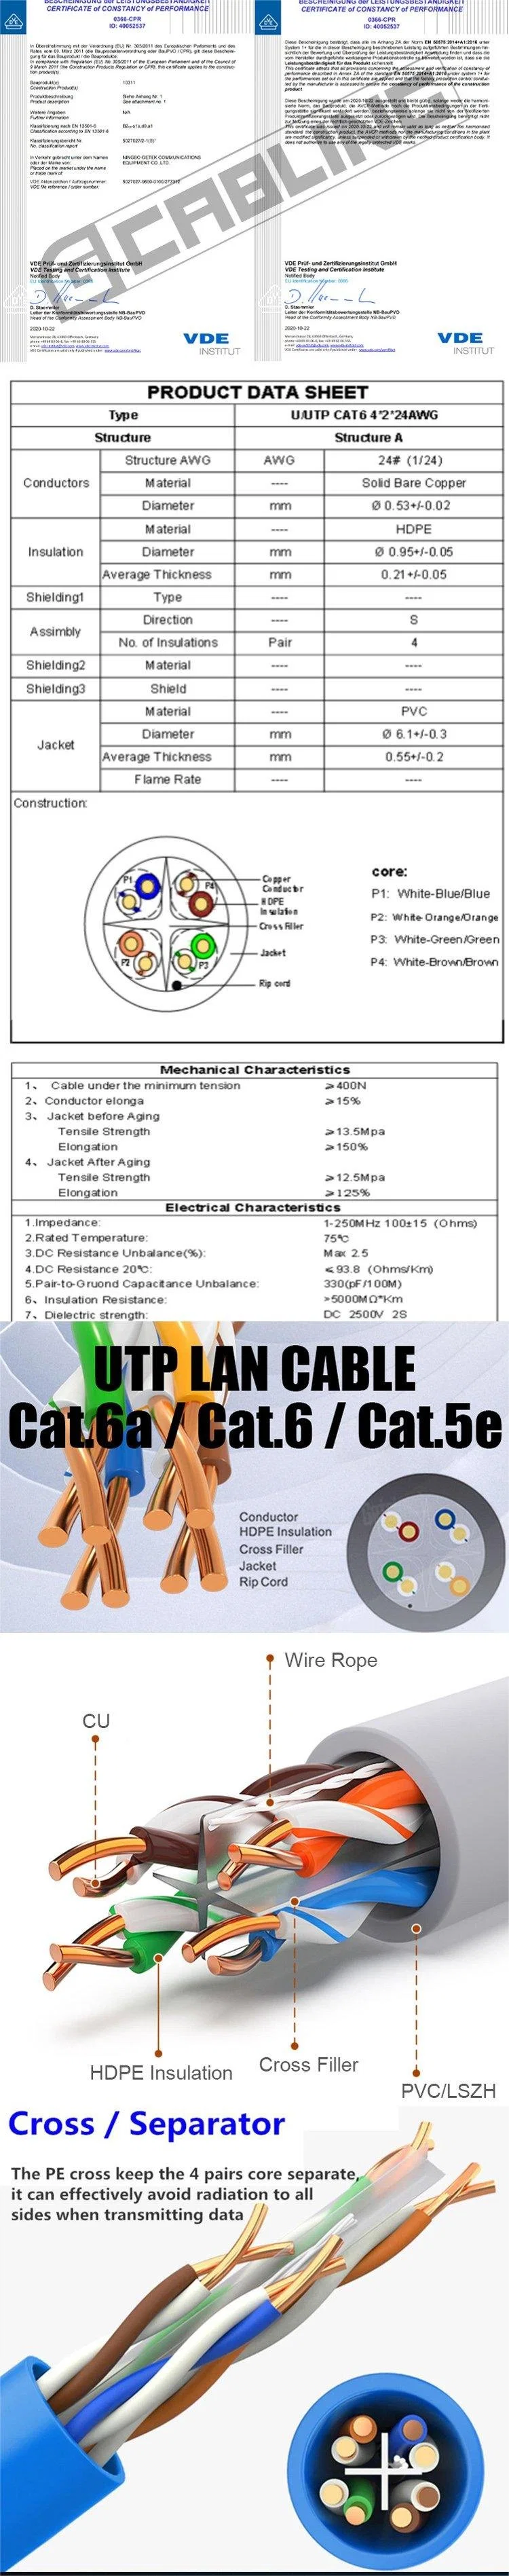 Gcabling Communication CAT6A CAT6 Cat5e UTP 4pair Twisted Solid LAN Cable